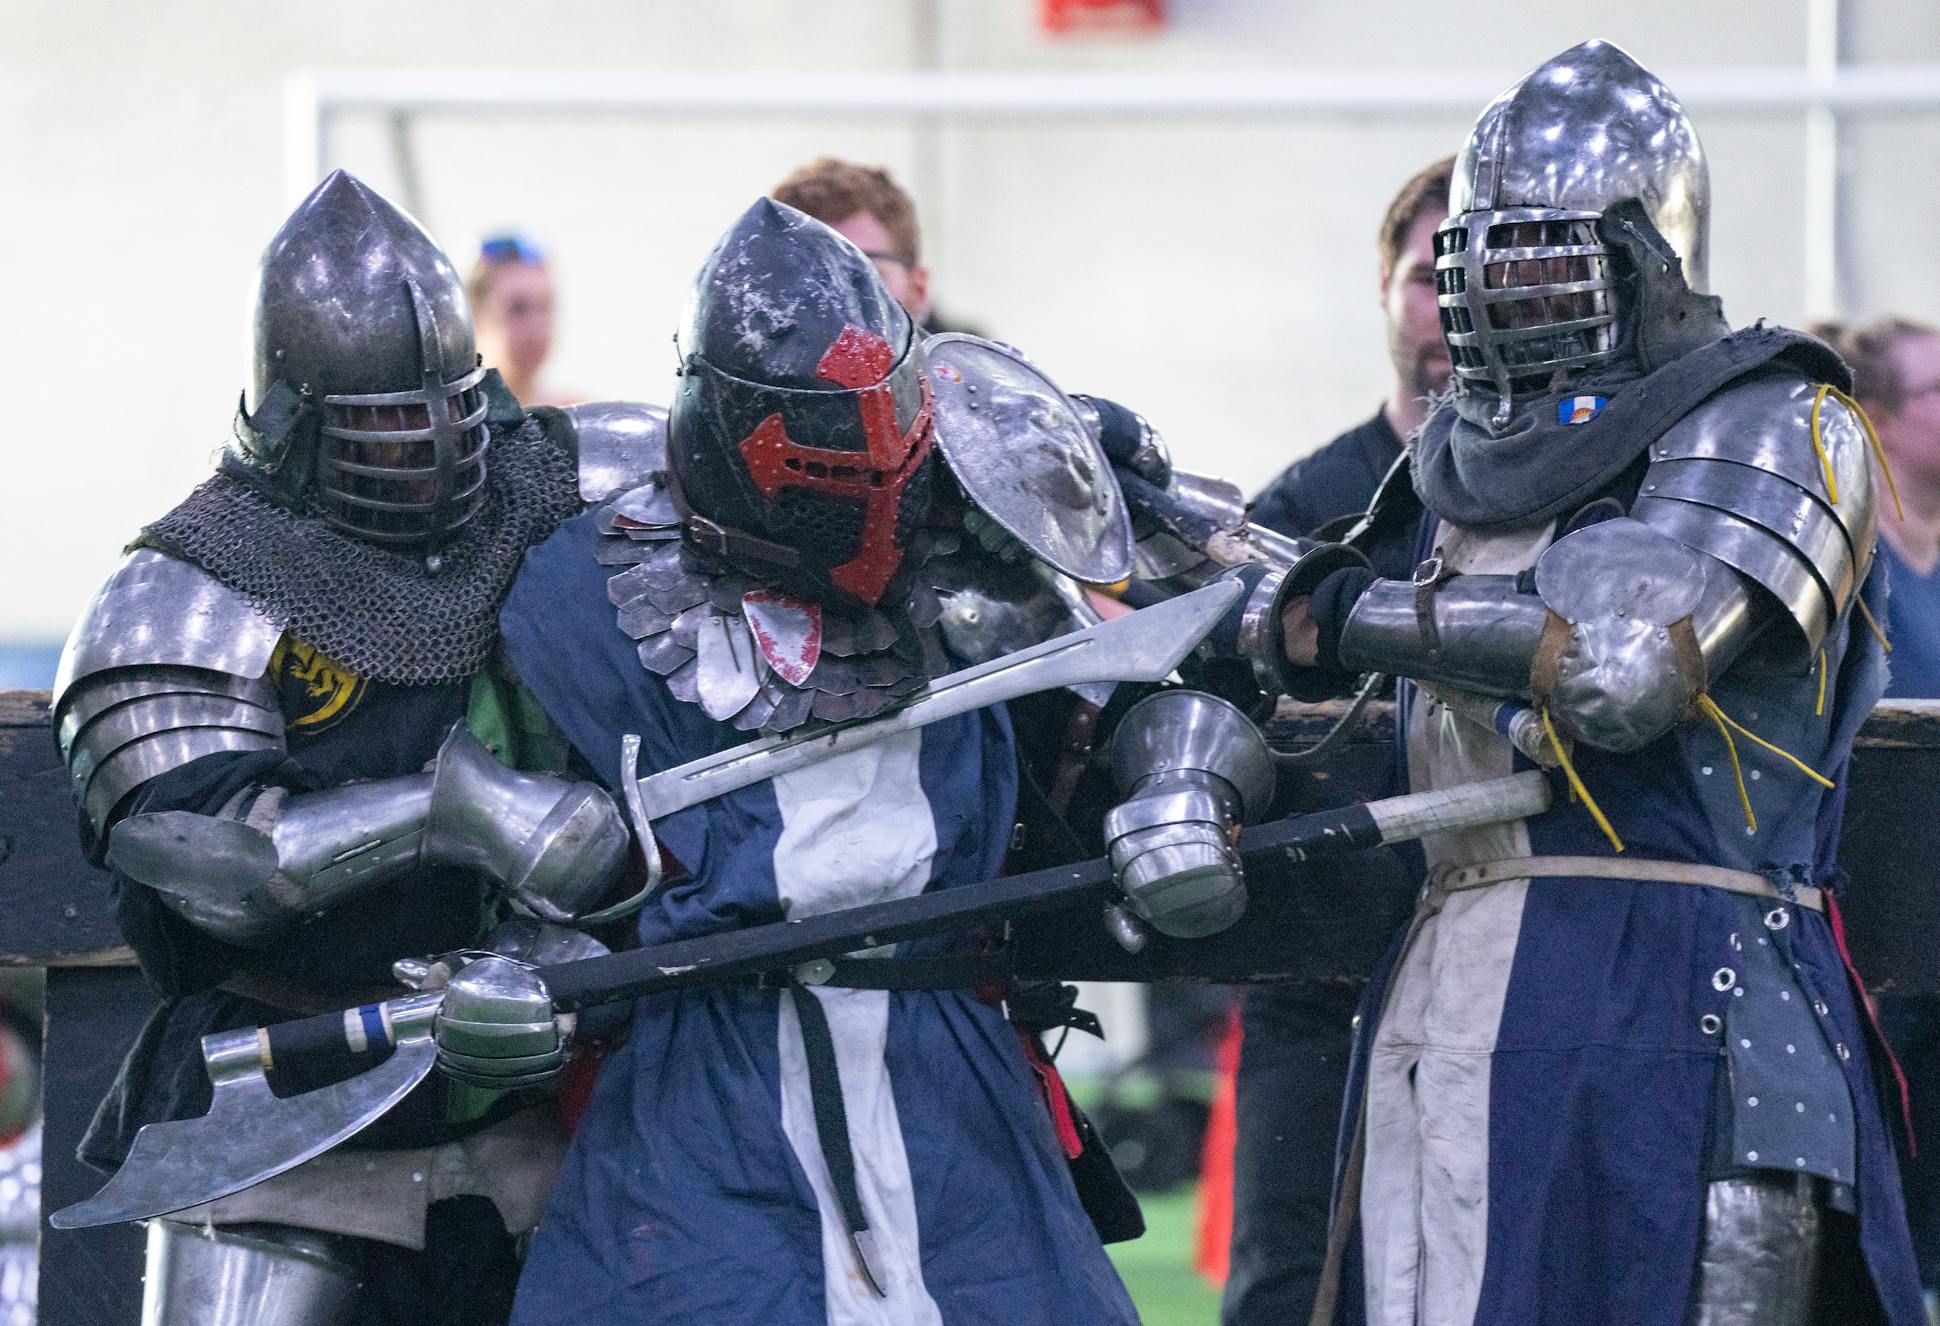 The suits of armor, which combatants must wear, can weigh 100 pounds or more.